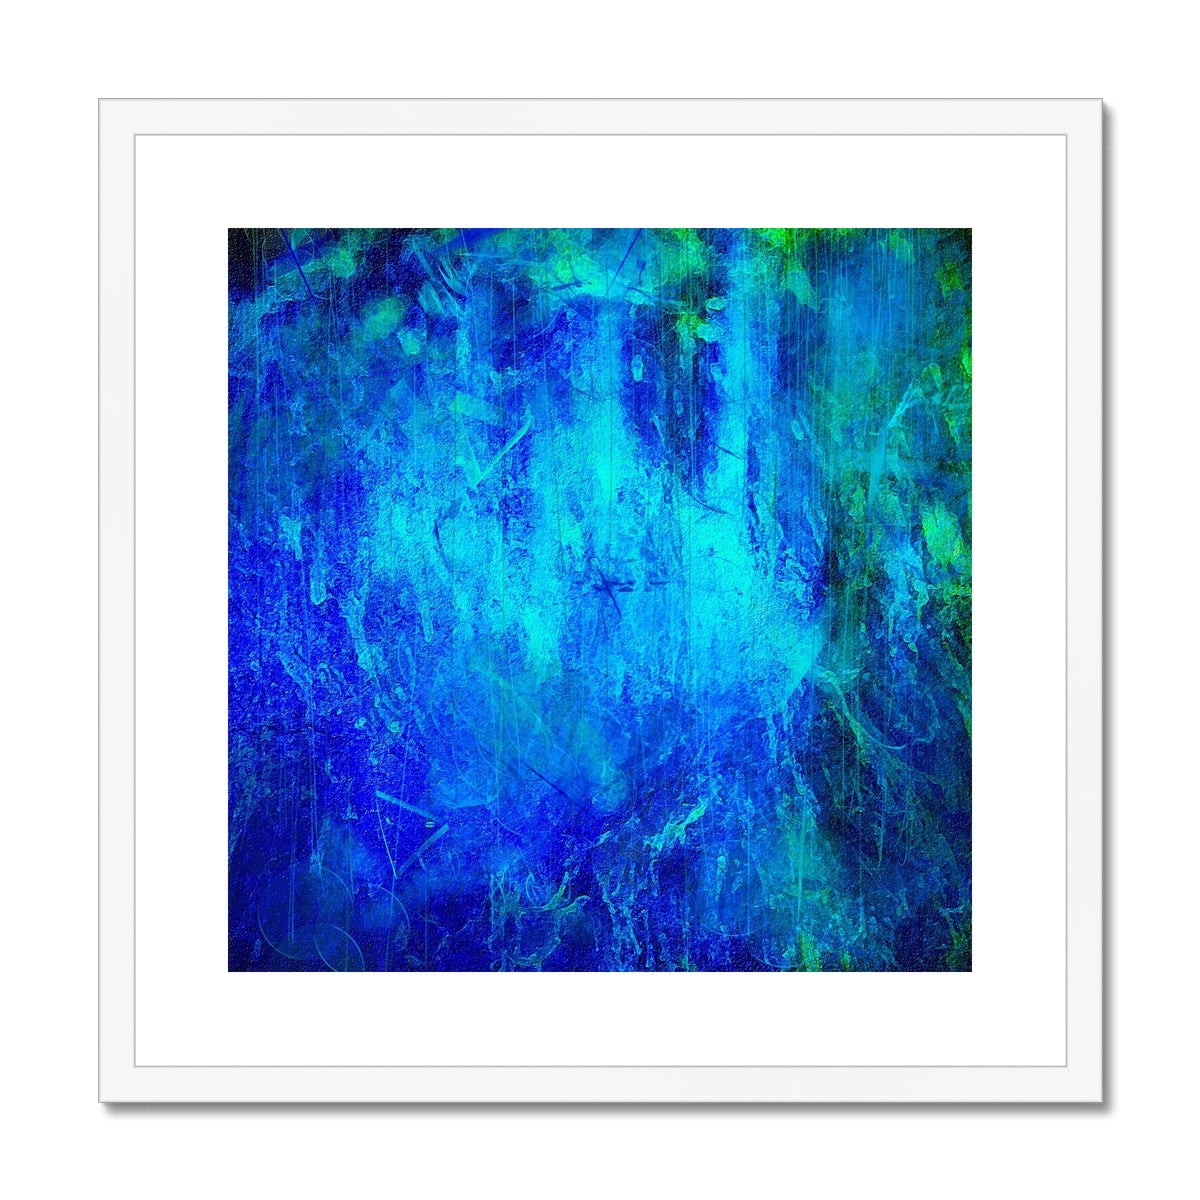 The Waterfall Abstract Painting | Framed & Mounted Prints From Scotland-Framed & Mounted Prints-Abstract & Impressionistic Art Gallery-20"x20"-White Frame-Paintings, Prints, Homeware, Art Gifts From Scotland By Scottish Artist Kevin Hunter